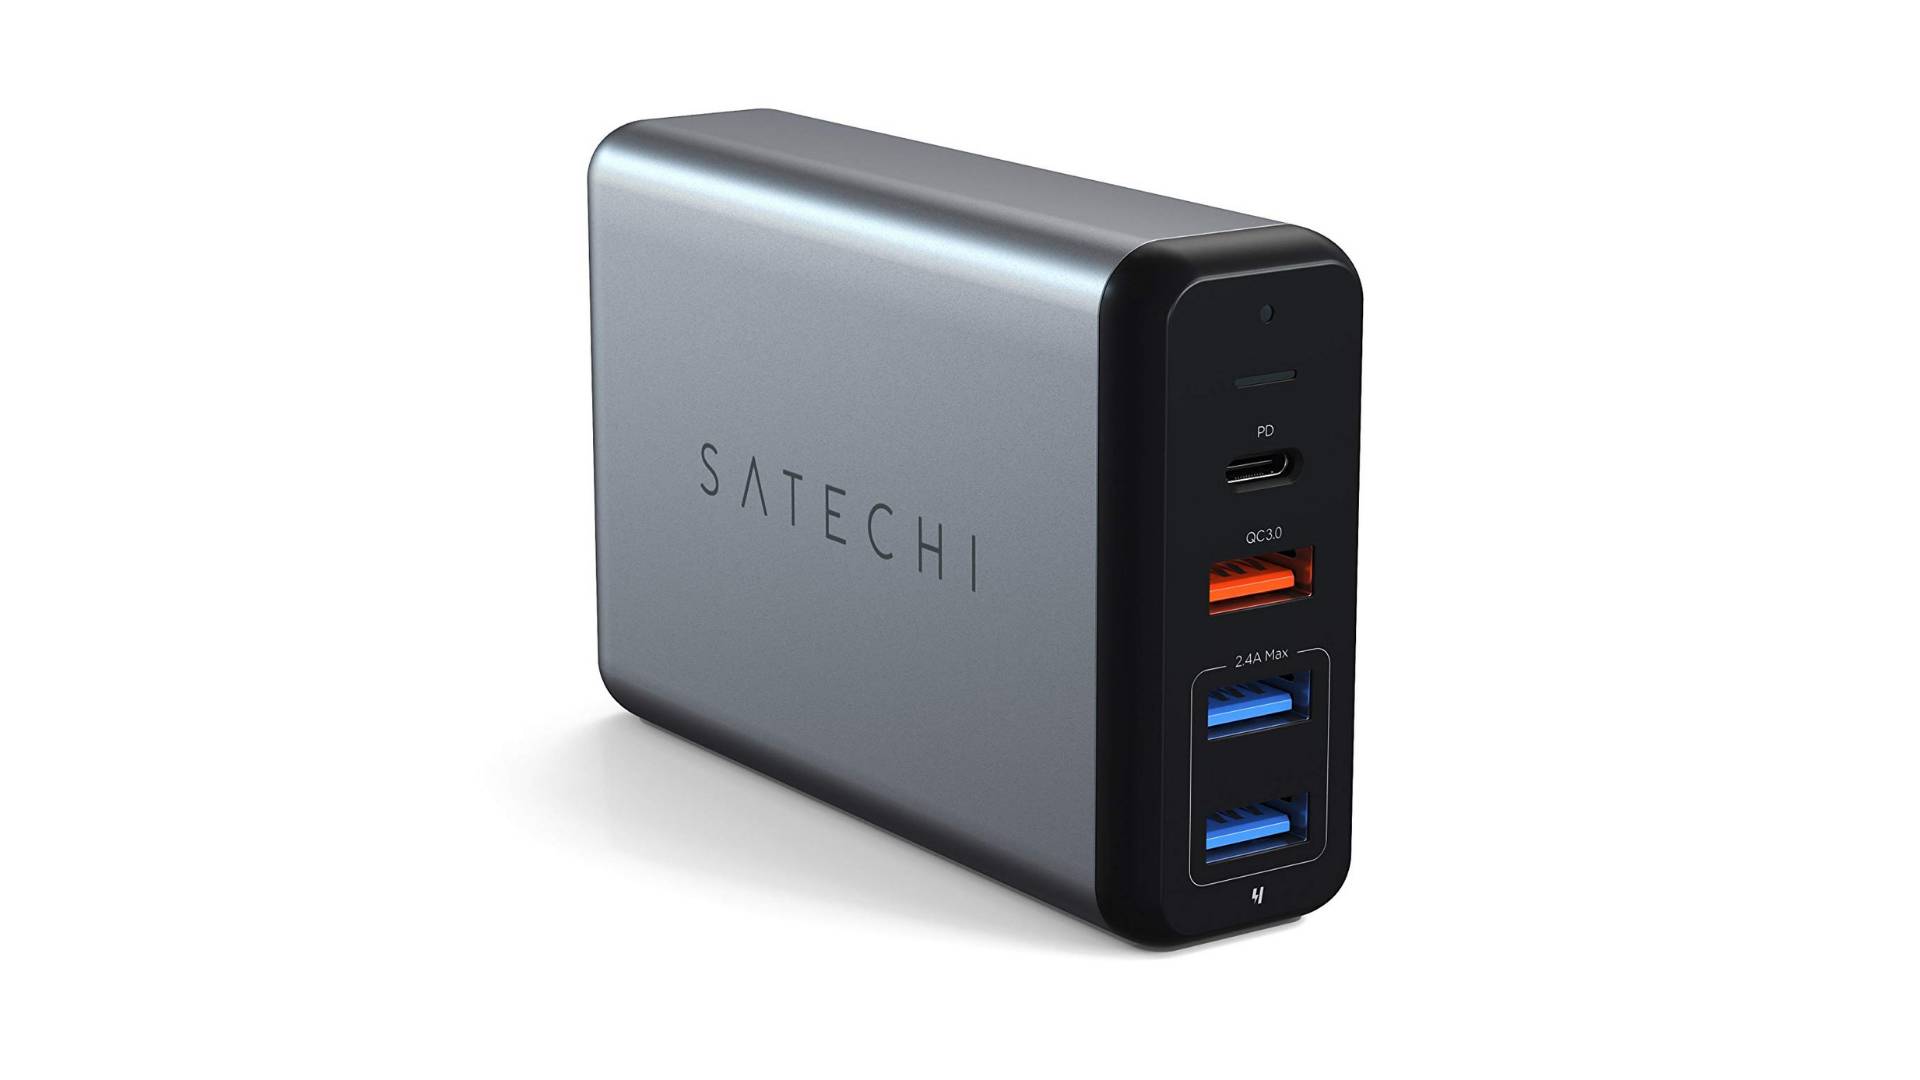 Satechi Type-C Travel Charger